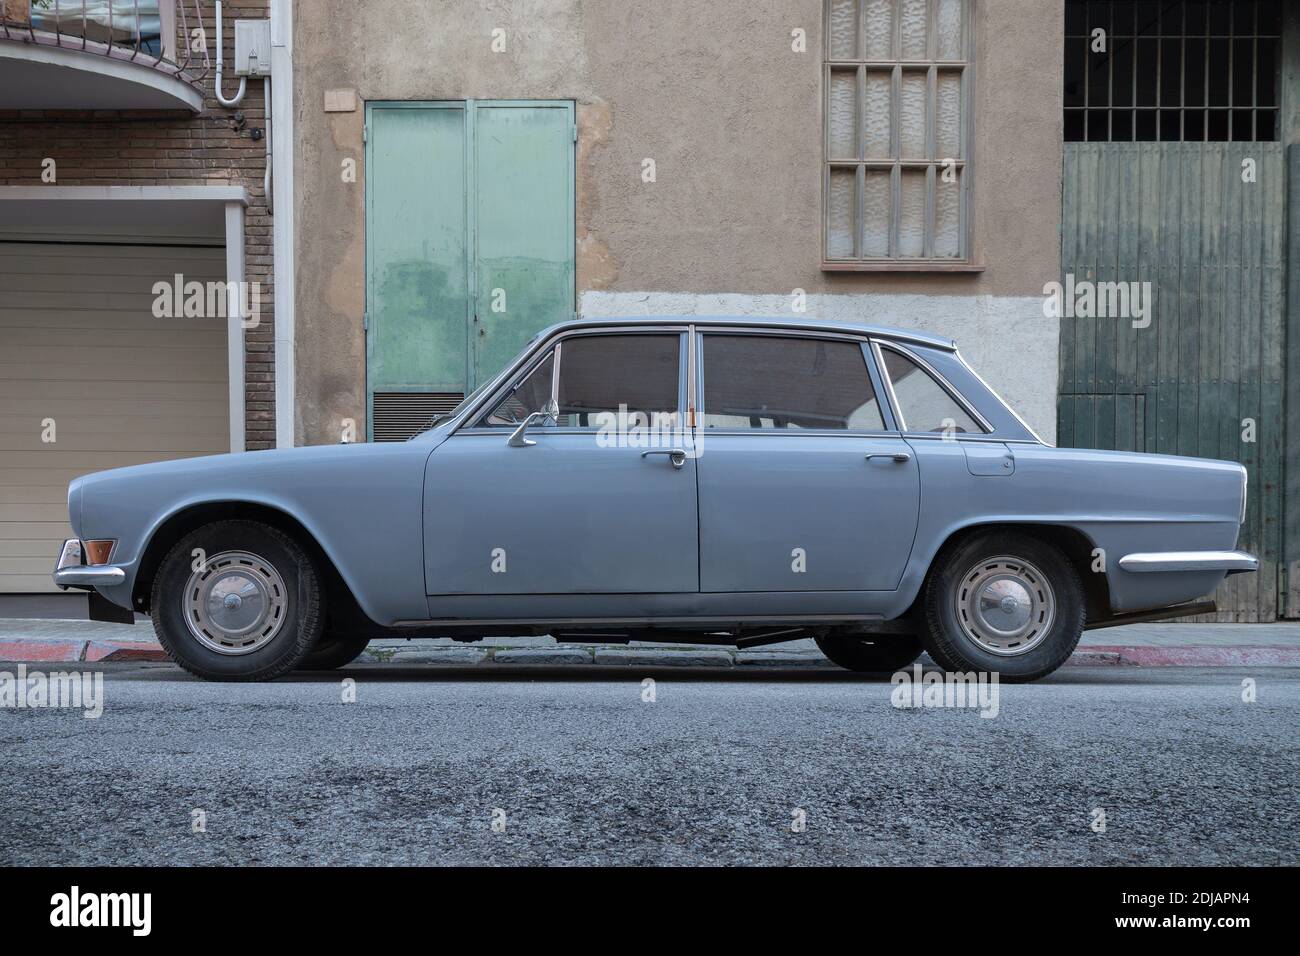 SABADELL, SPAIN-DECEMBER 12, 2020: 1963-1969 Triumph 2000 Mk 1 Saloon (Overdrive), Side view Stock Photo